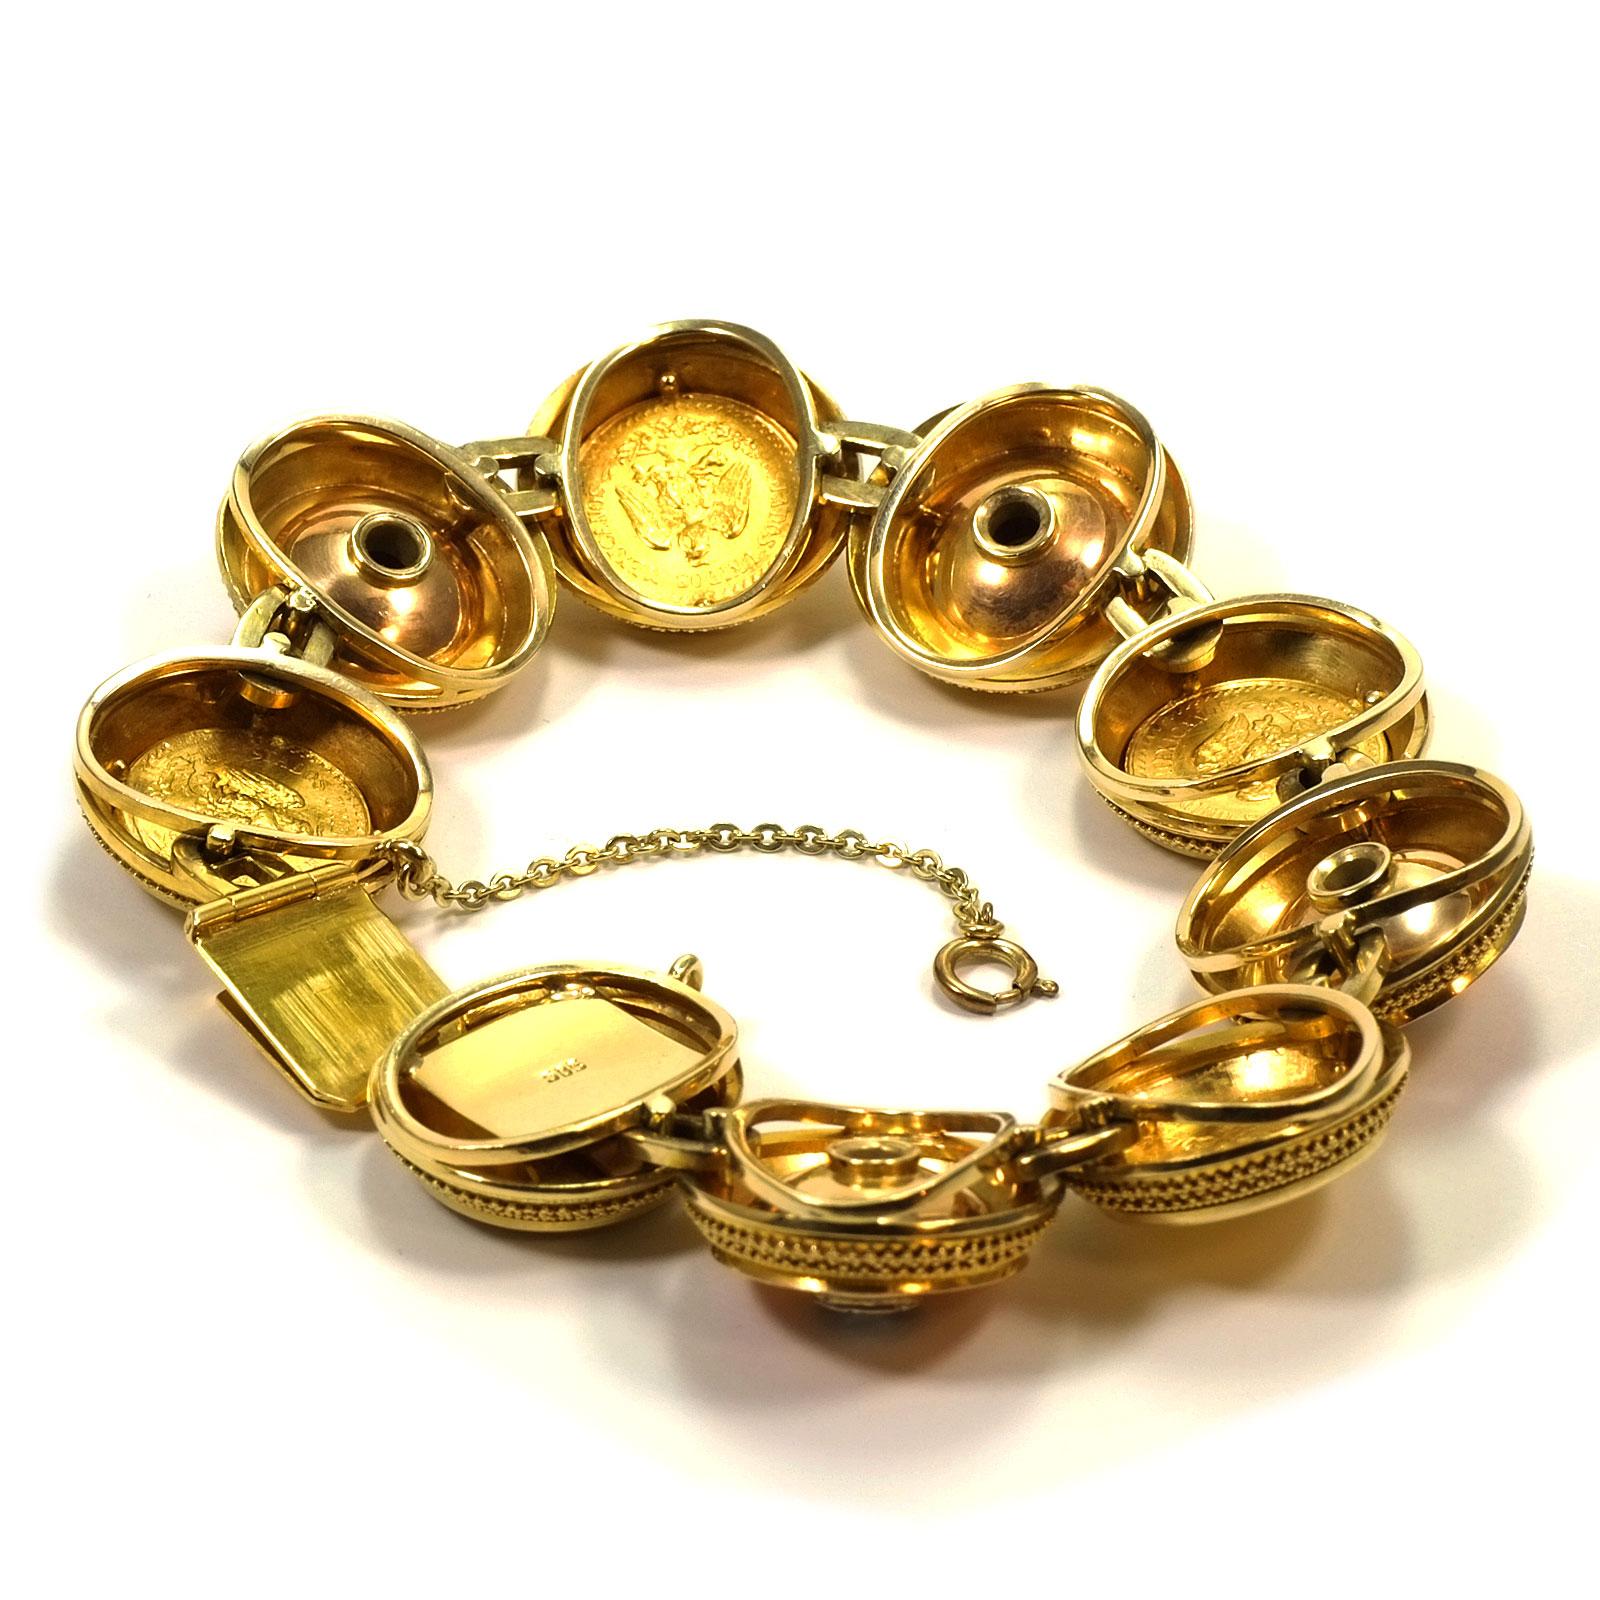 Vintage Mexican Dos Y Meso Peso Gold Coin Bracelet with 0.2 Carat Diamonds In Good Condition For Sale In Goettingen, DE